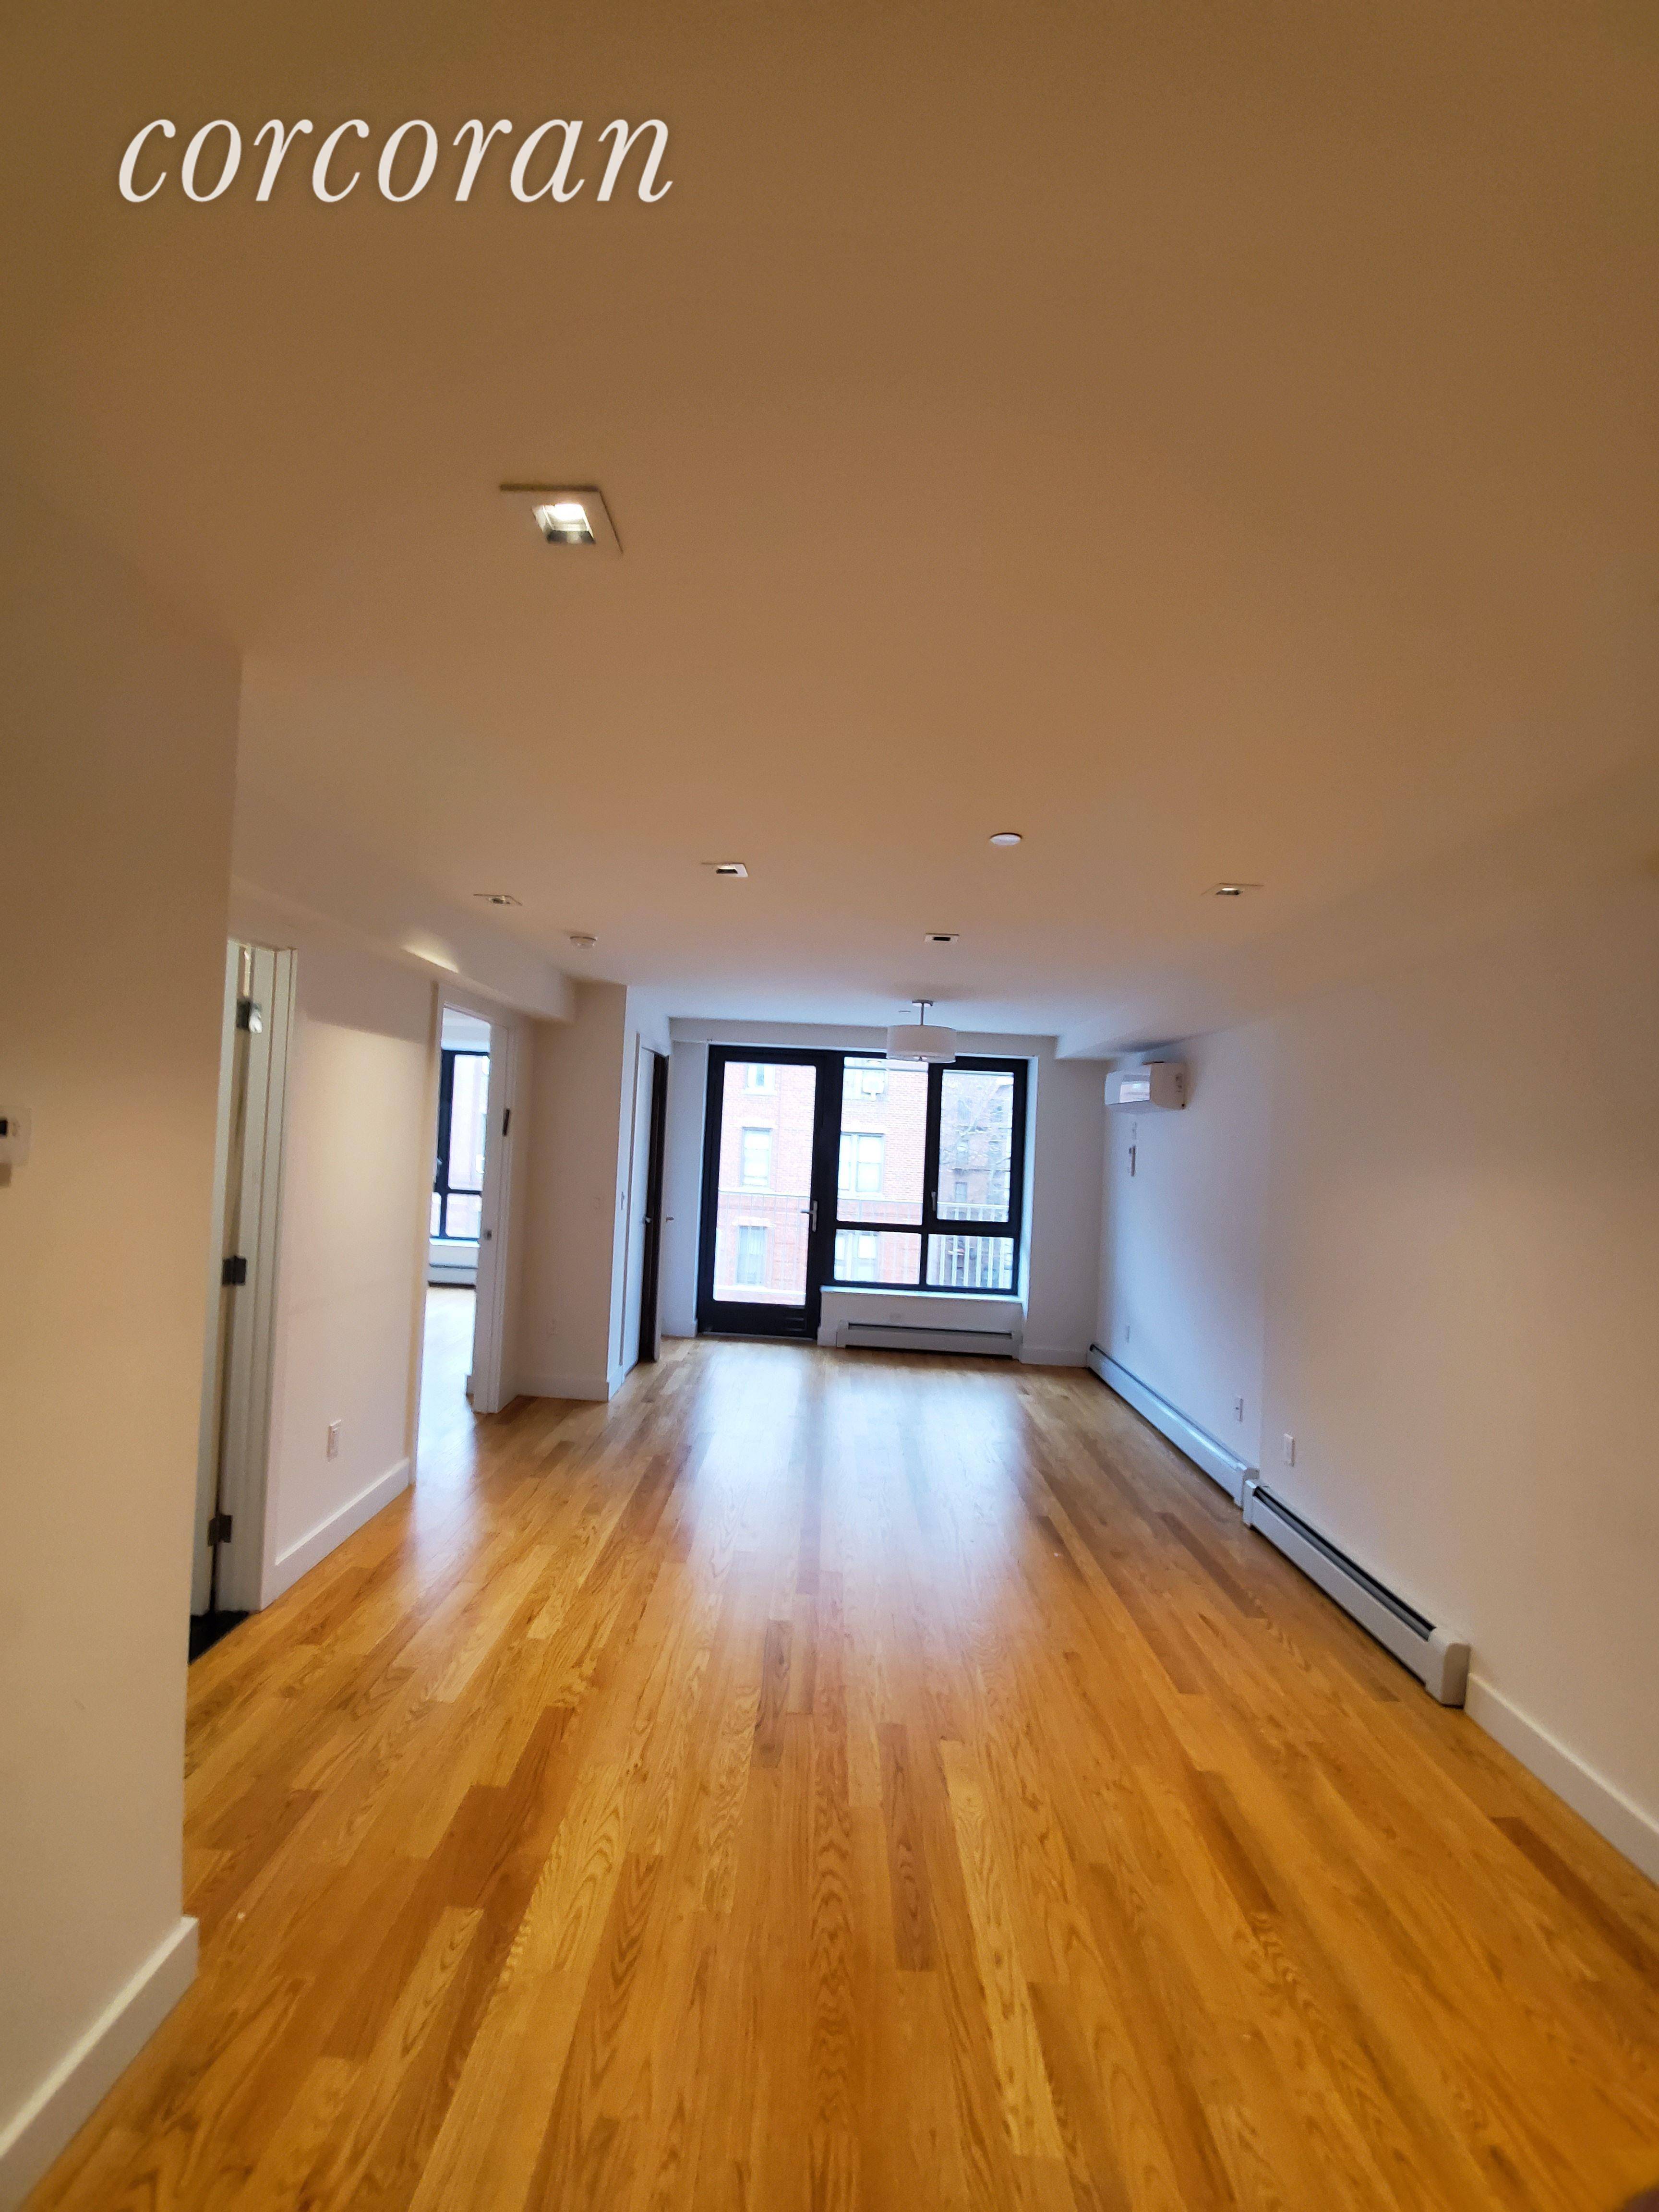 Modern Sleek 1 Bedroom ApartmentPrivate Outdoor SpaceGym and Shared RoofProfessional Management CompanyTons of Natural sunlightWasher and Dryer in Apartment.